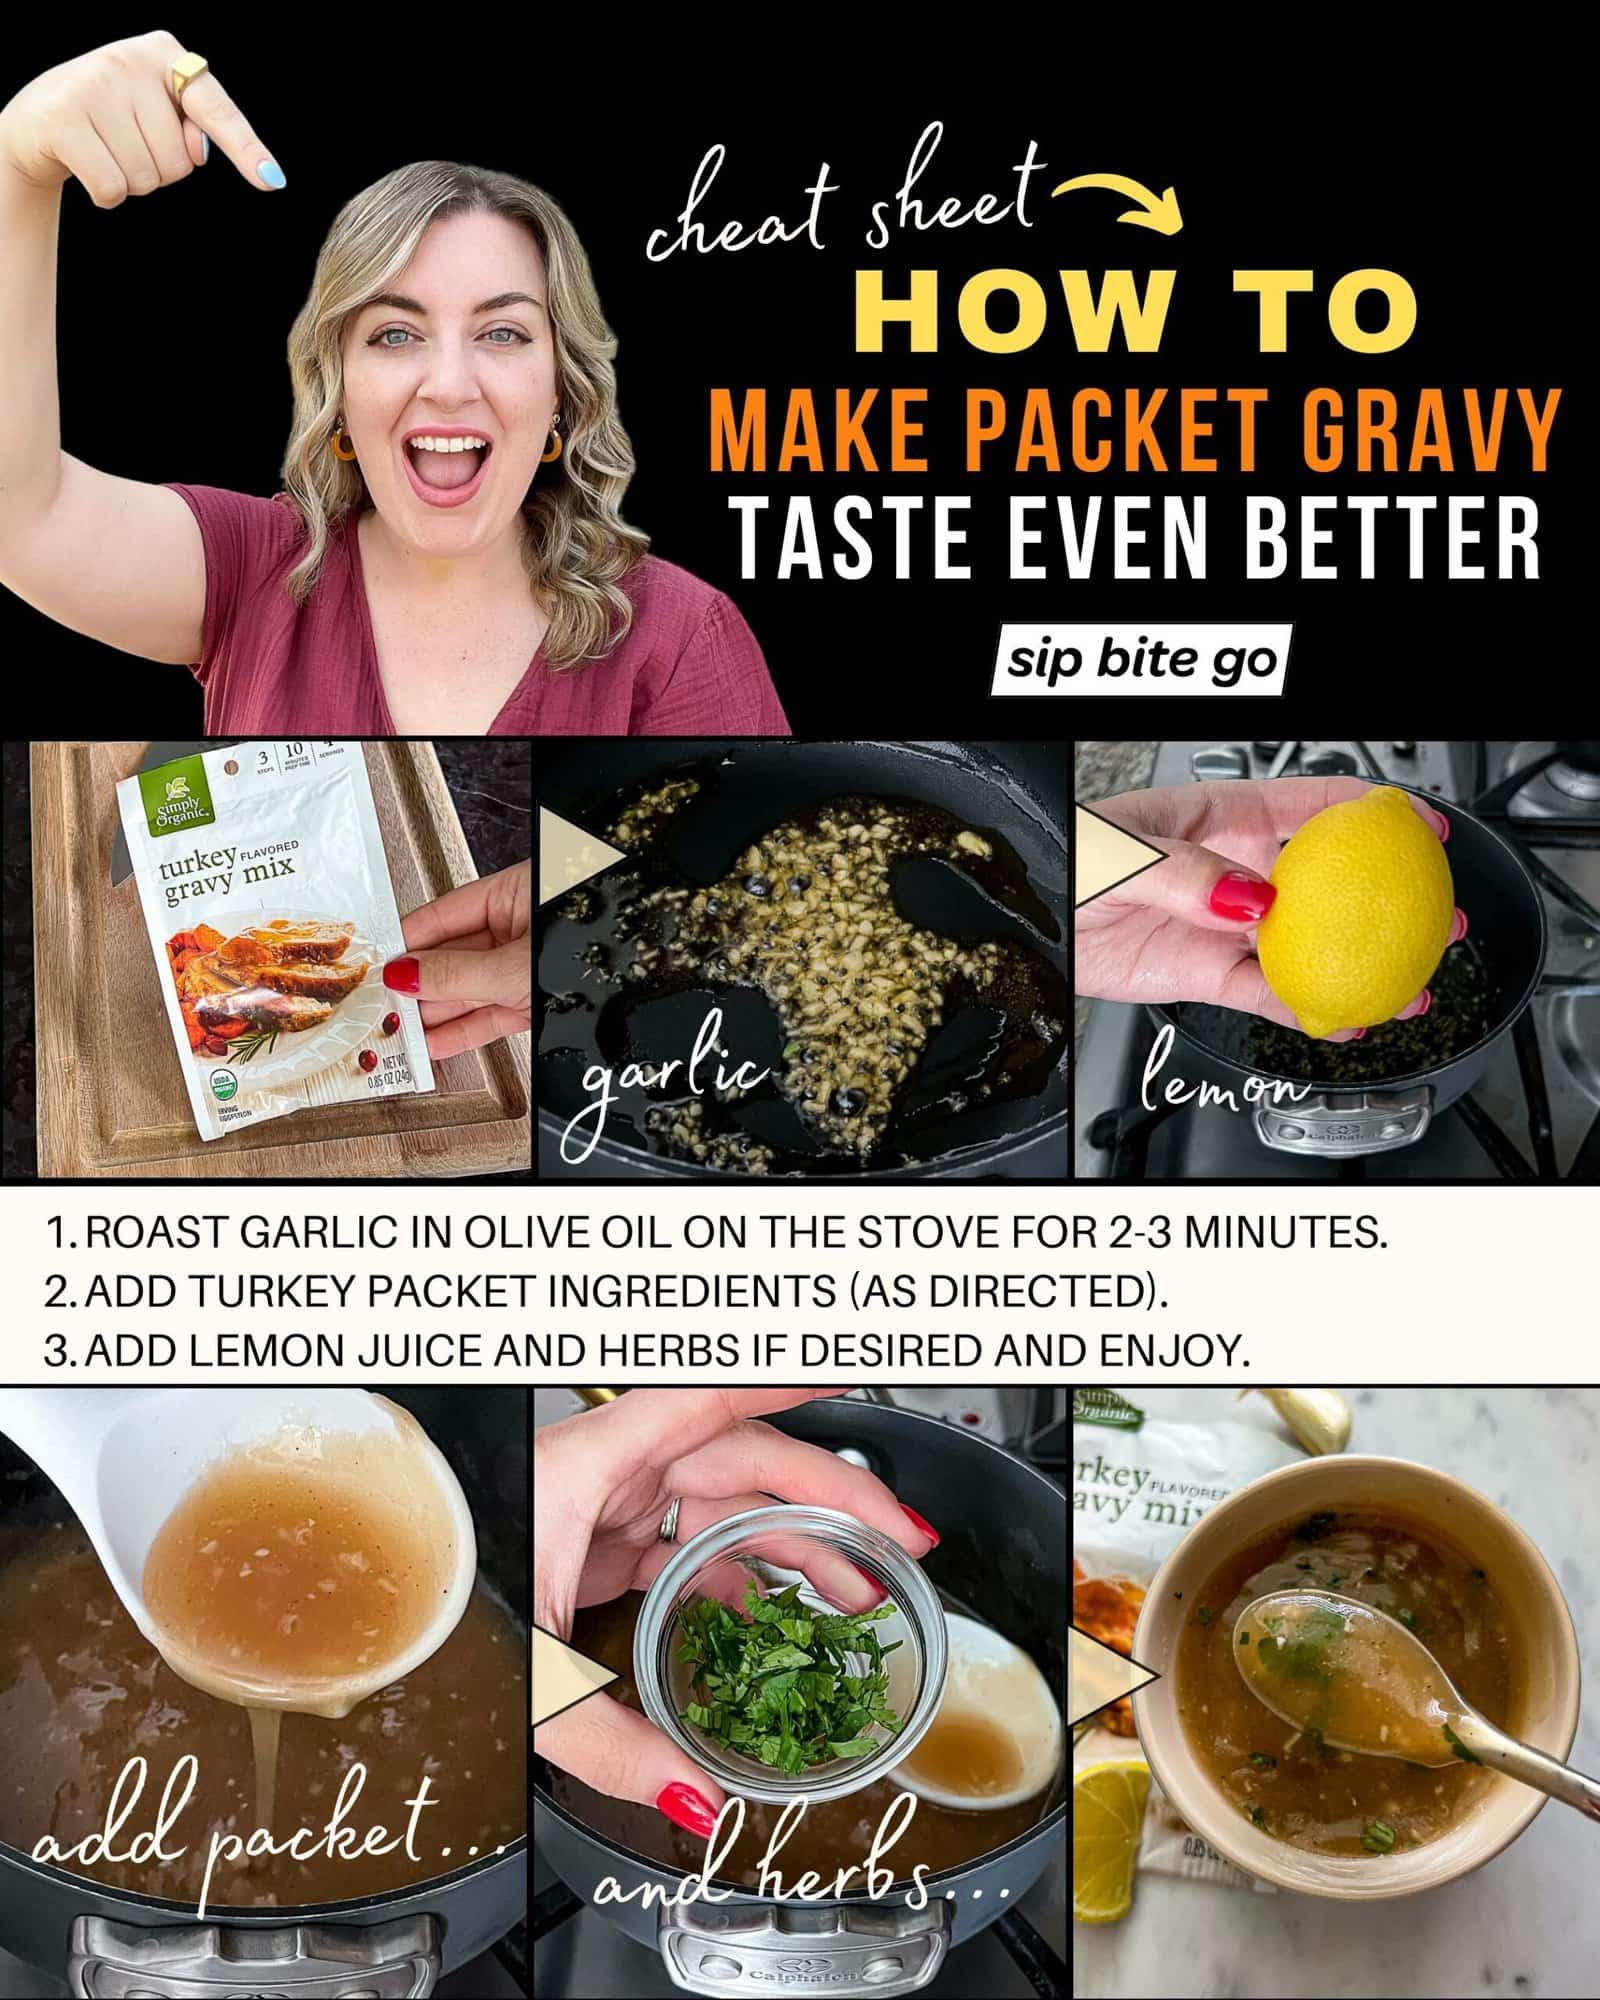 Infographic with step by step recipe for how to make turkey gravy packet better with fresh ingredients